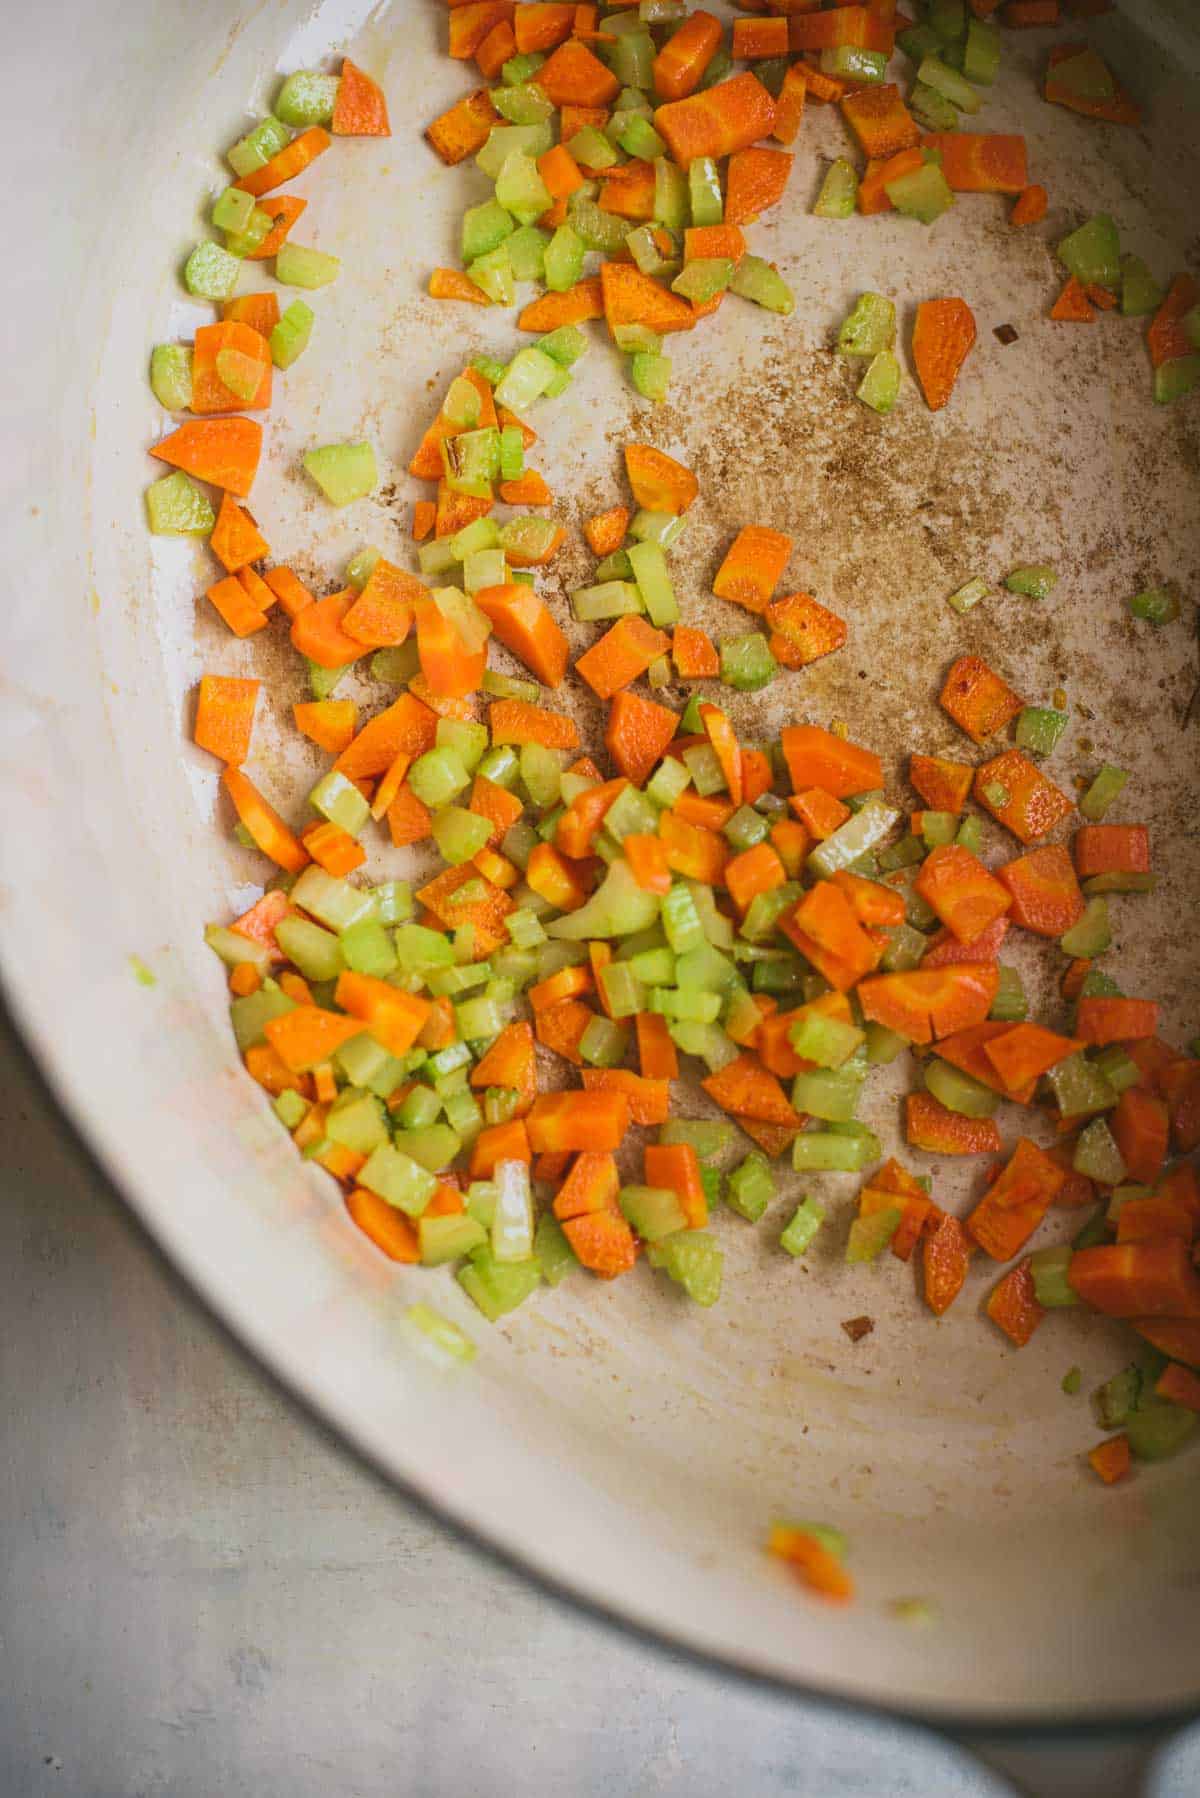 Carrots and celery are being cooked in the bottom of a large white saucepan.